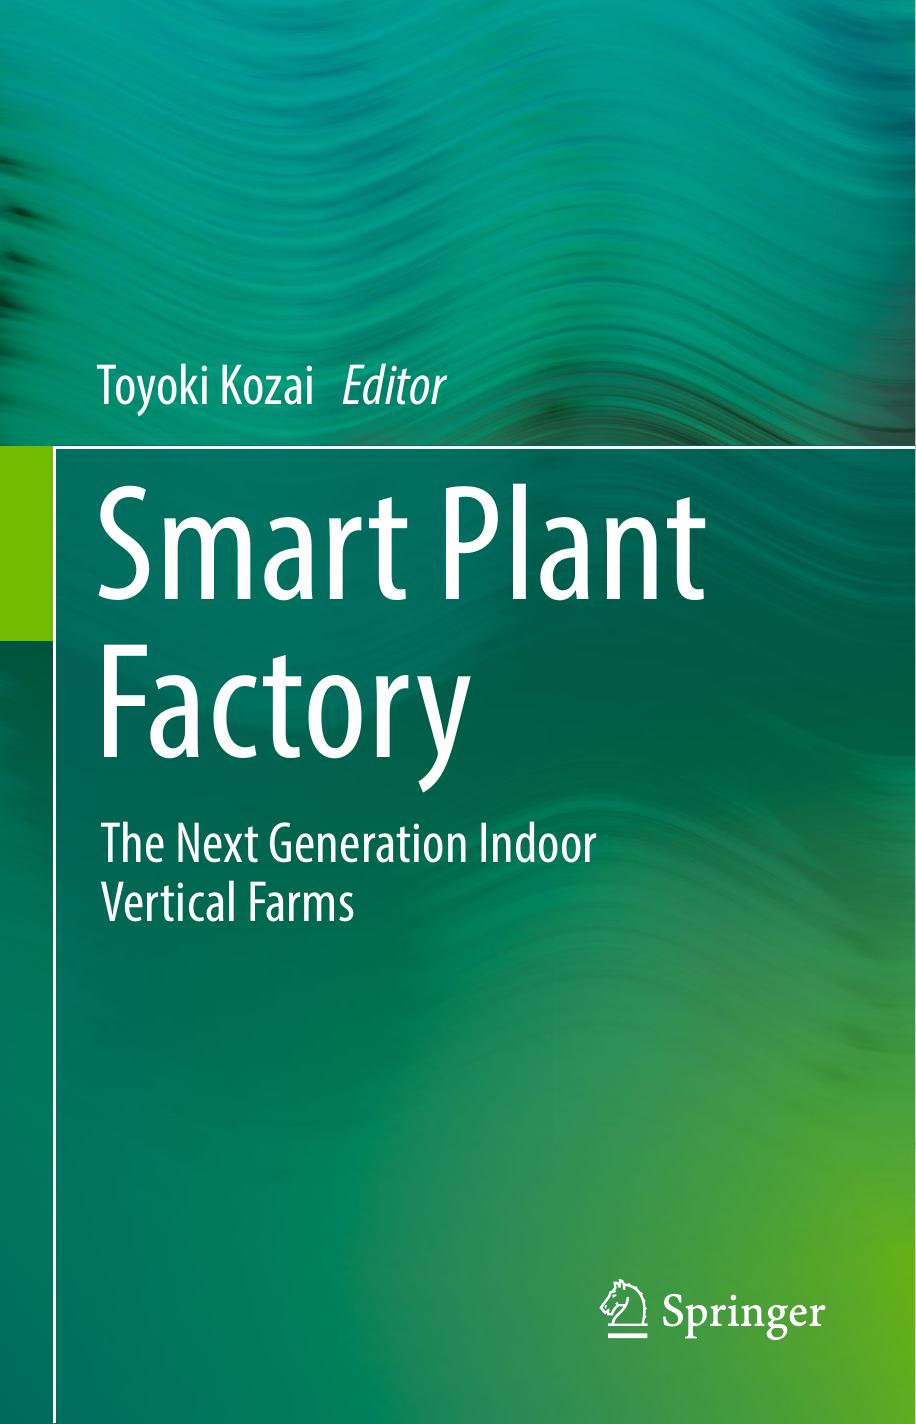 Smart Plant Factory: The Next Generation Indoor Vertical Farms